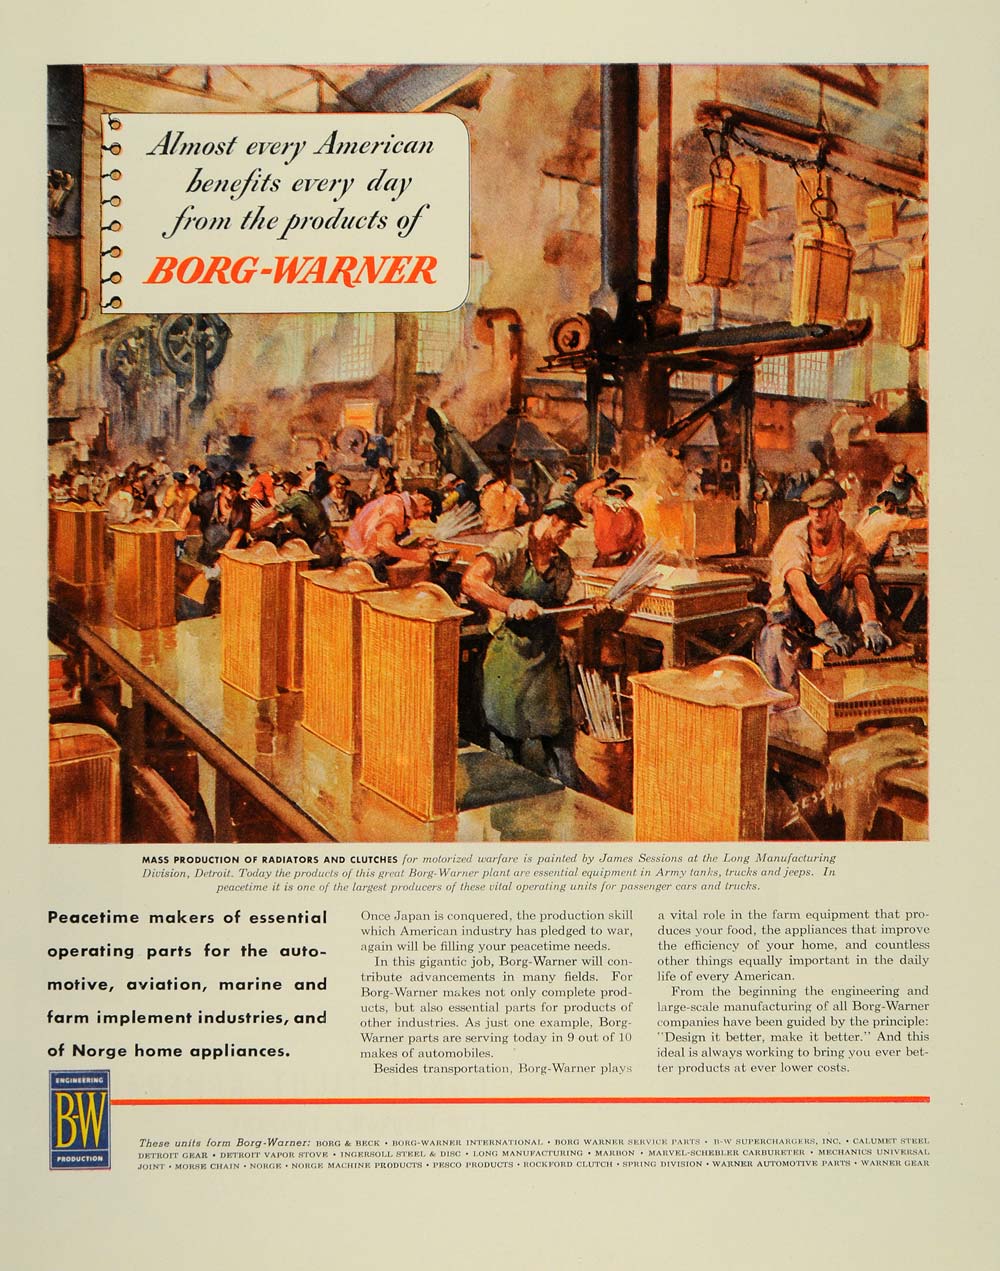 1945 Ad WWII Borg Warner Factory Plant James Sessions - ORIGINAL ADVERTISING FT6